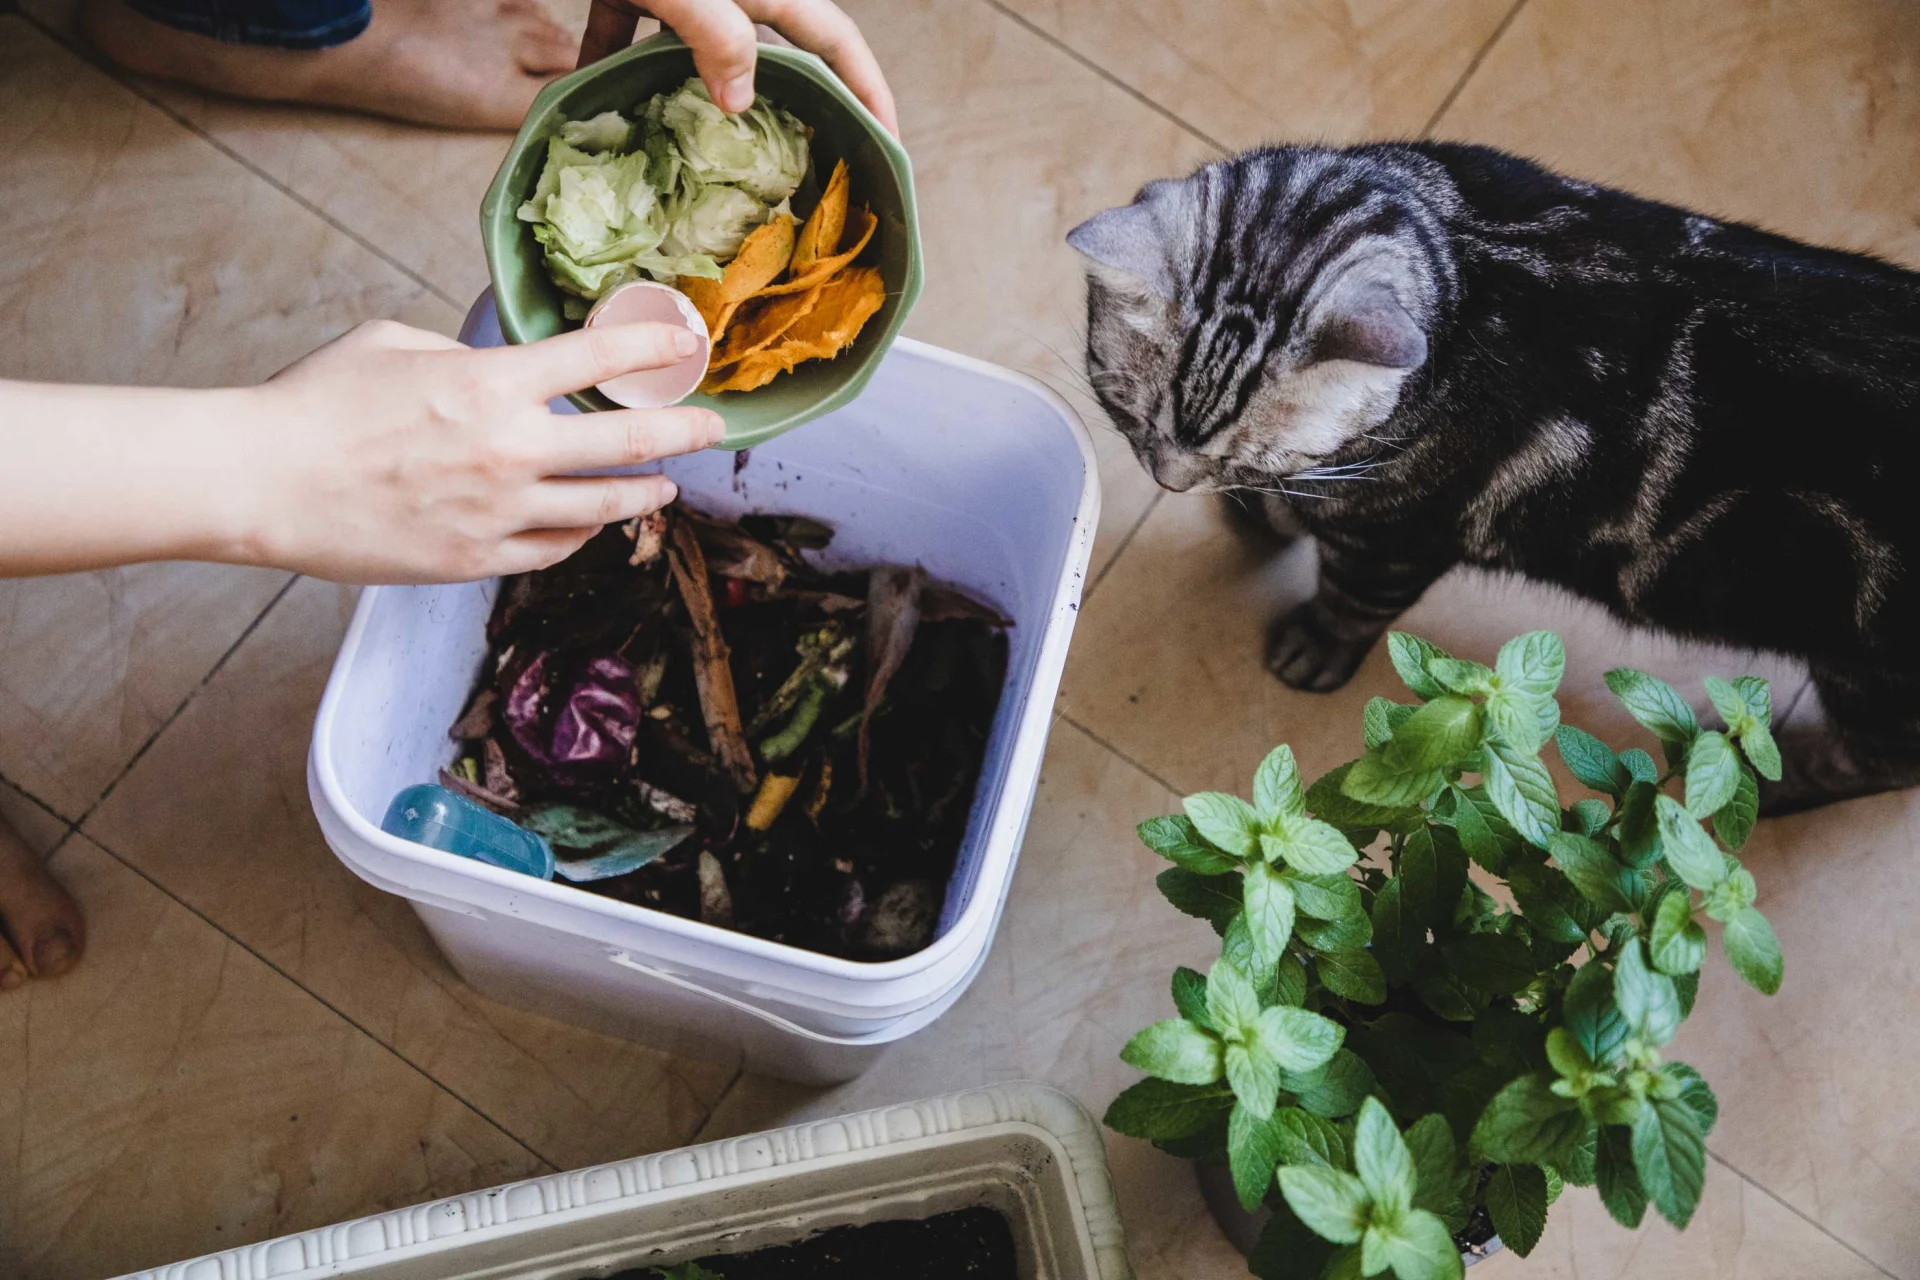 A woman throws food scraps into a compost bin, next to her a curious cat watches